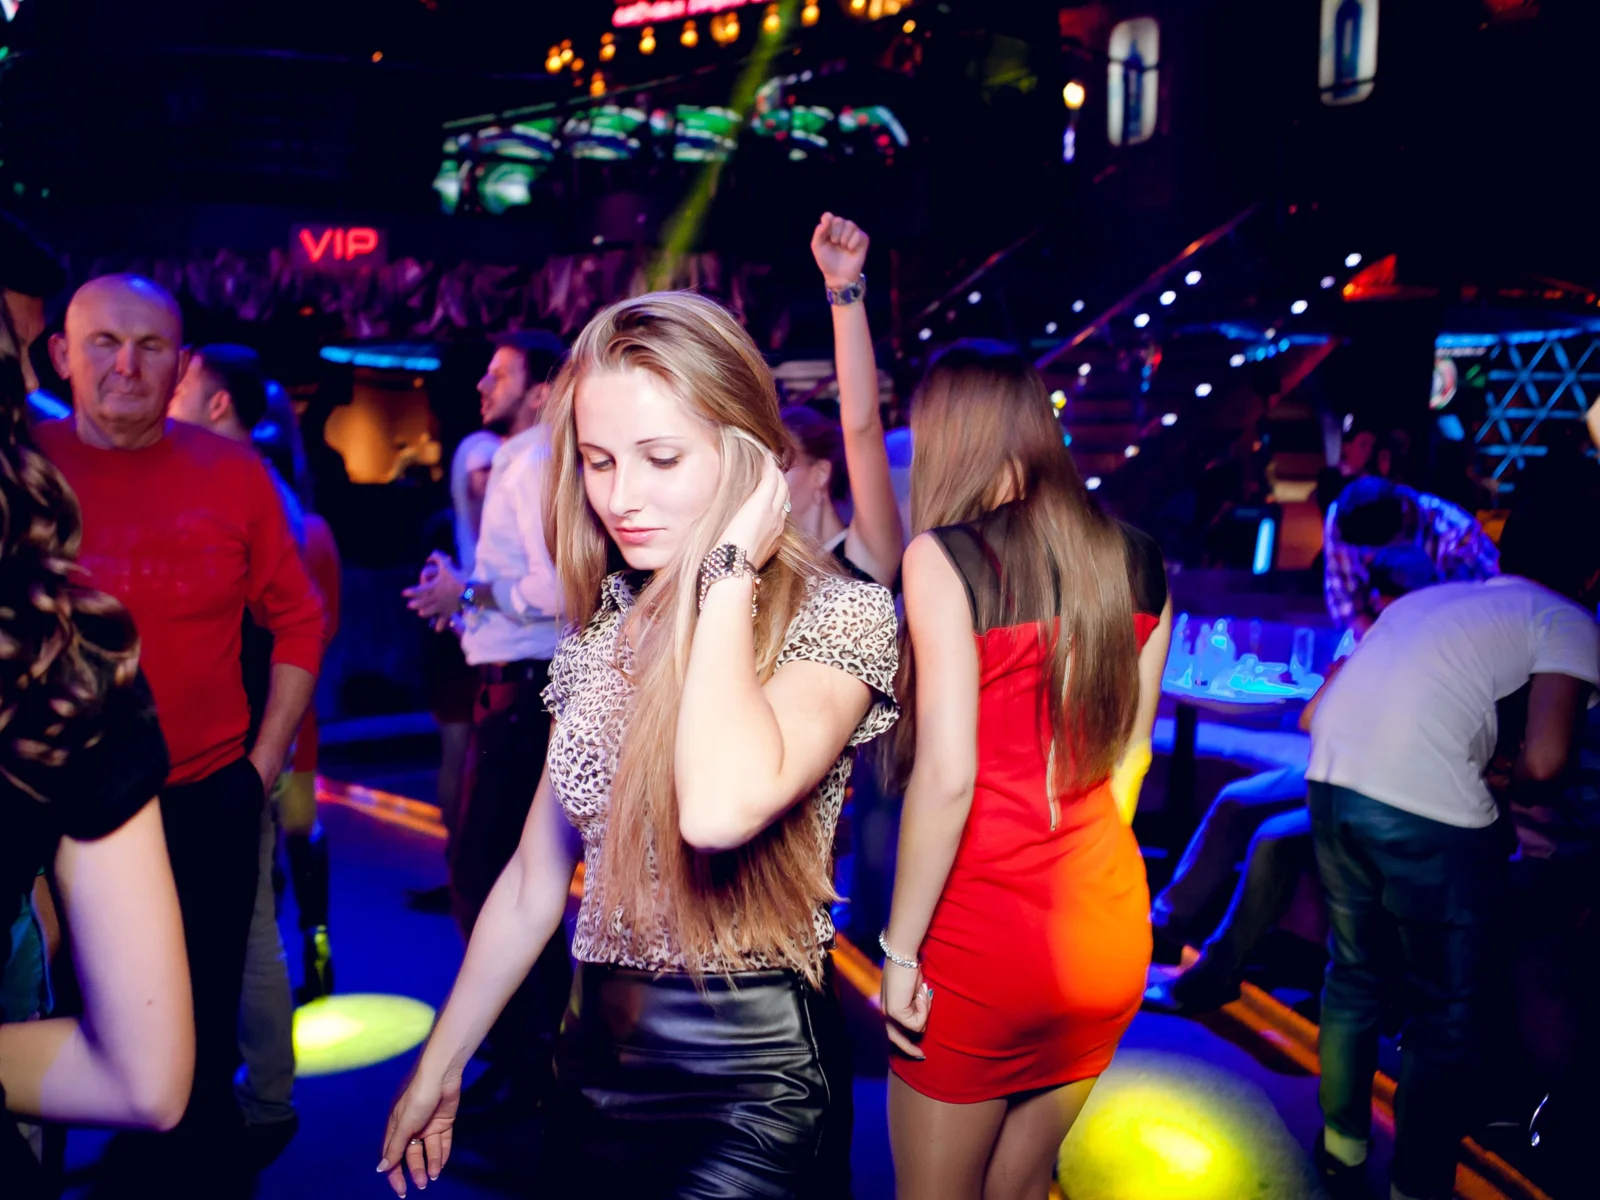 Hot Ukranian woman at a club, one of the best must-do things in Santorini